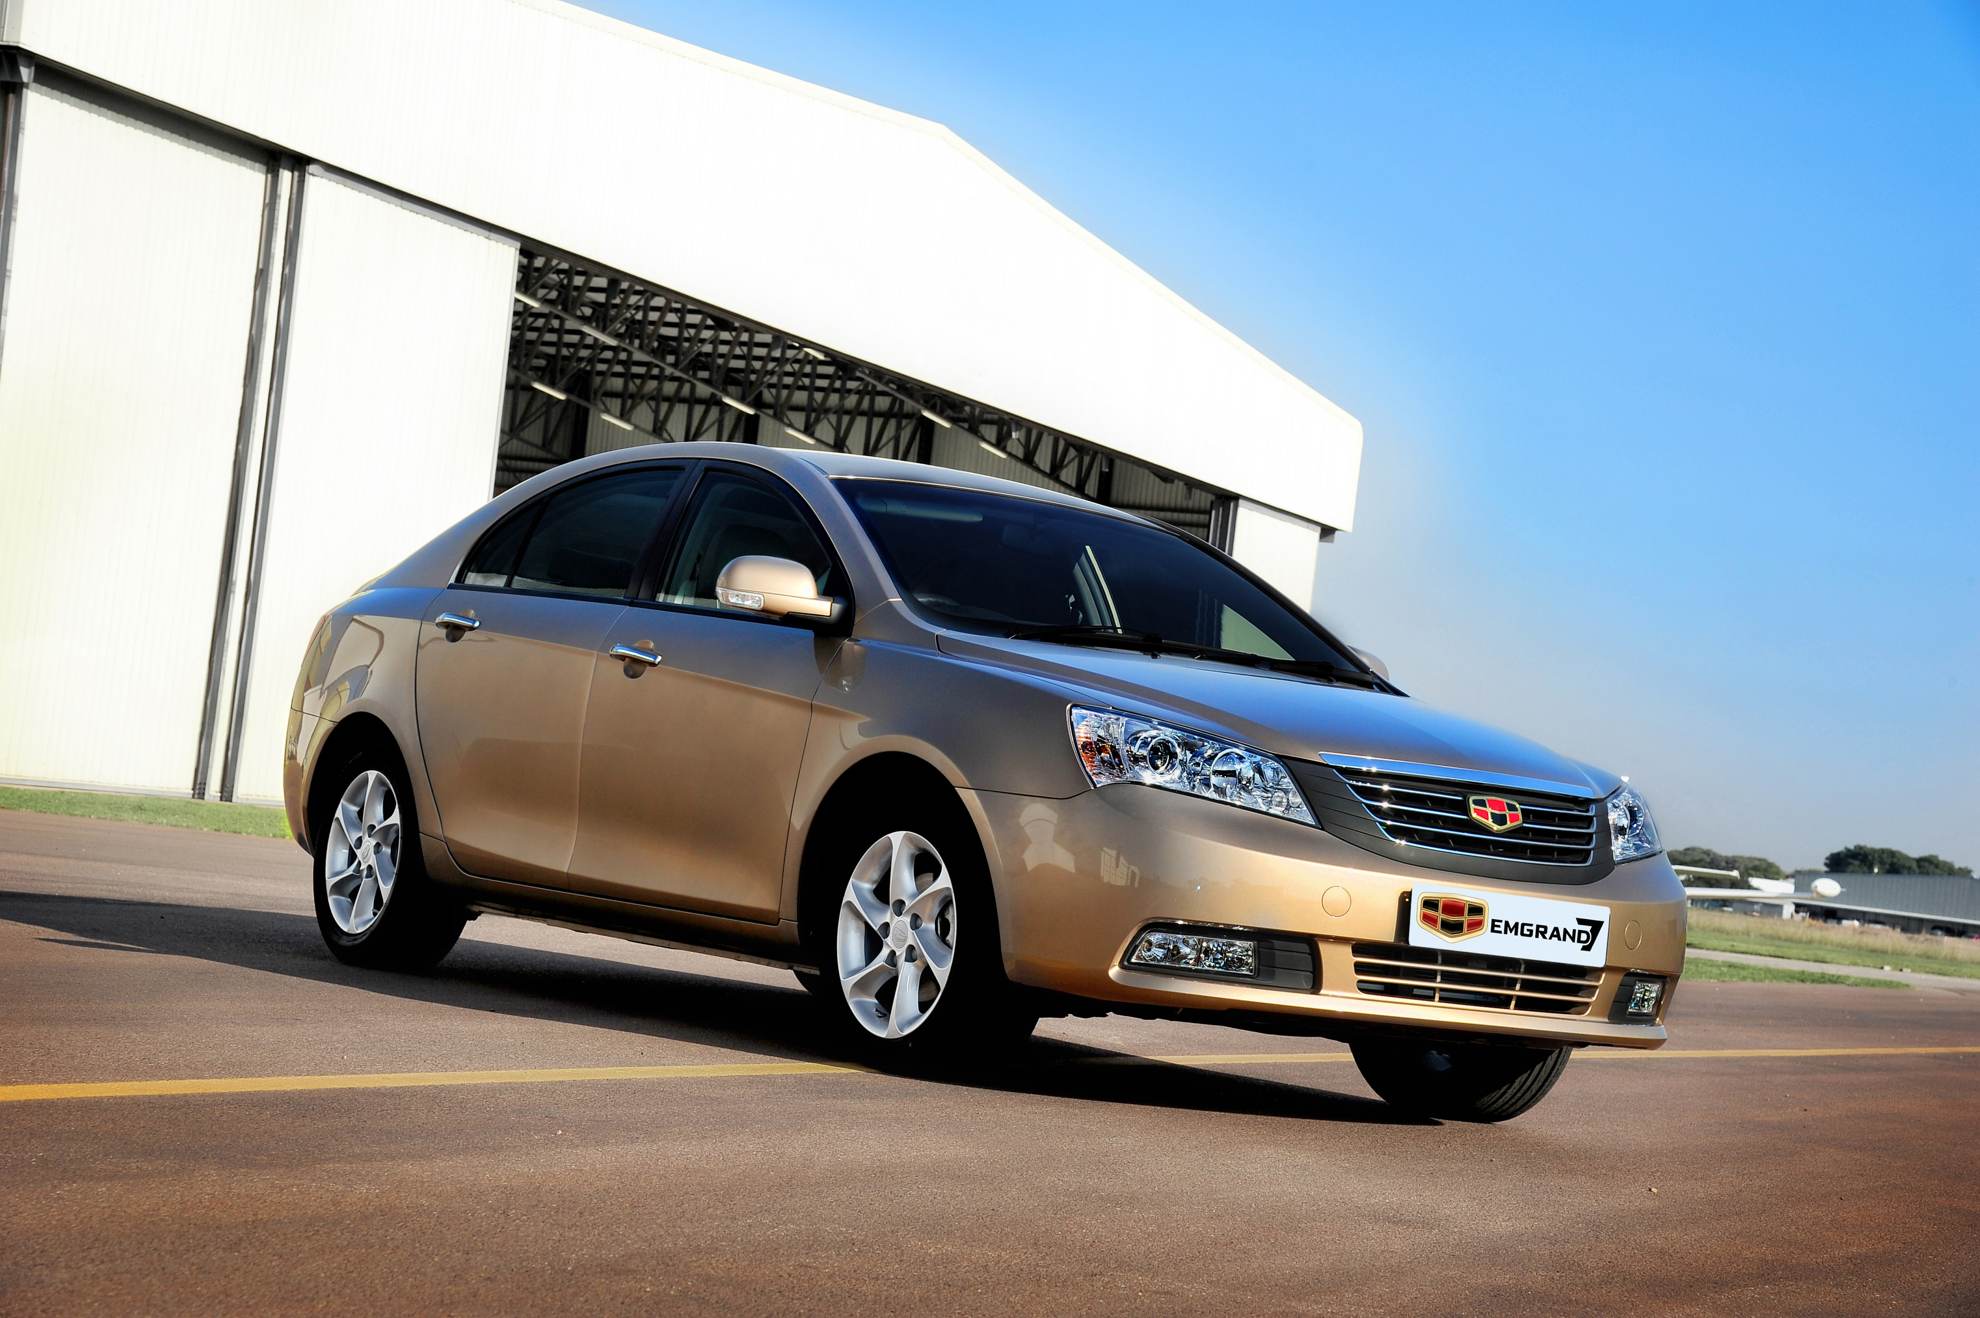 Geely breaks into 2013 Fortune 500